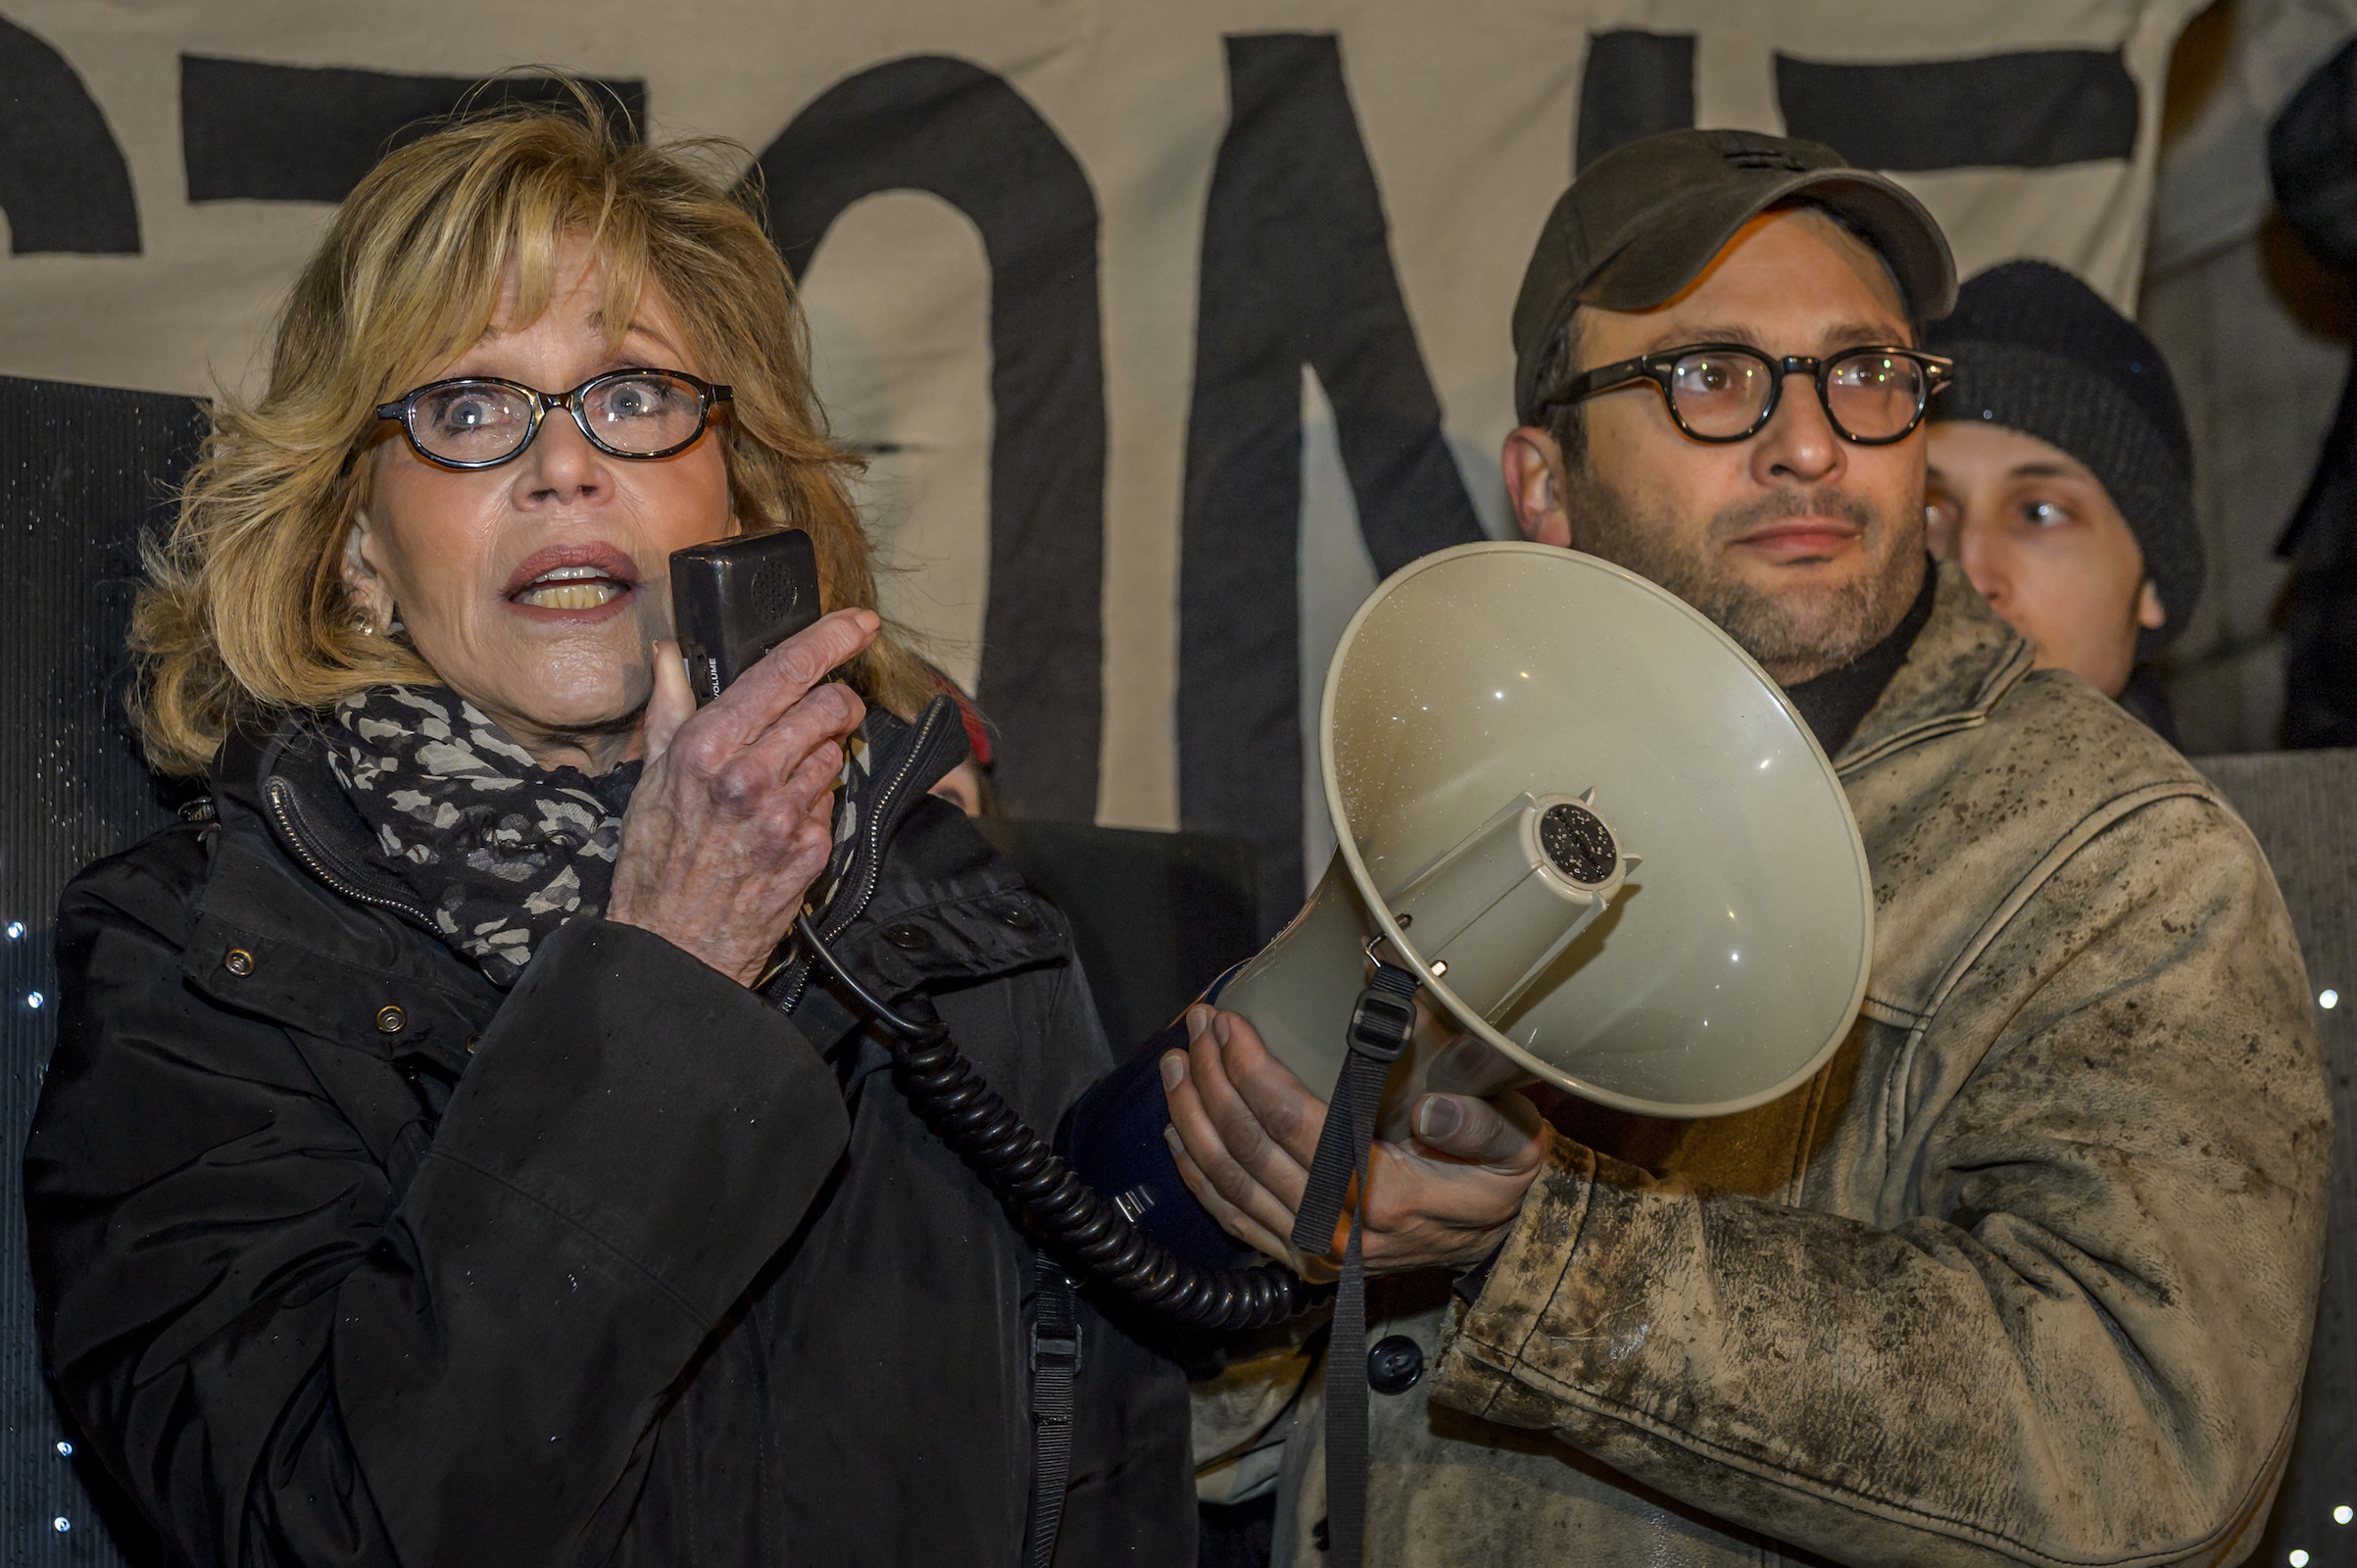 Two-time Academy Award winner Jane Fonda and Gasland Film director Josh Fox joined in the evening of Jan. 24, 2017, at Columbus Circle in New York City for a rally and march to Trump Tower in a massive peaceful protest after Trump signs orders to advance Keystone XL and Dakota Access Pipelines. (Pacific Press/LightRocket/Getty Images)